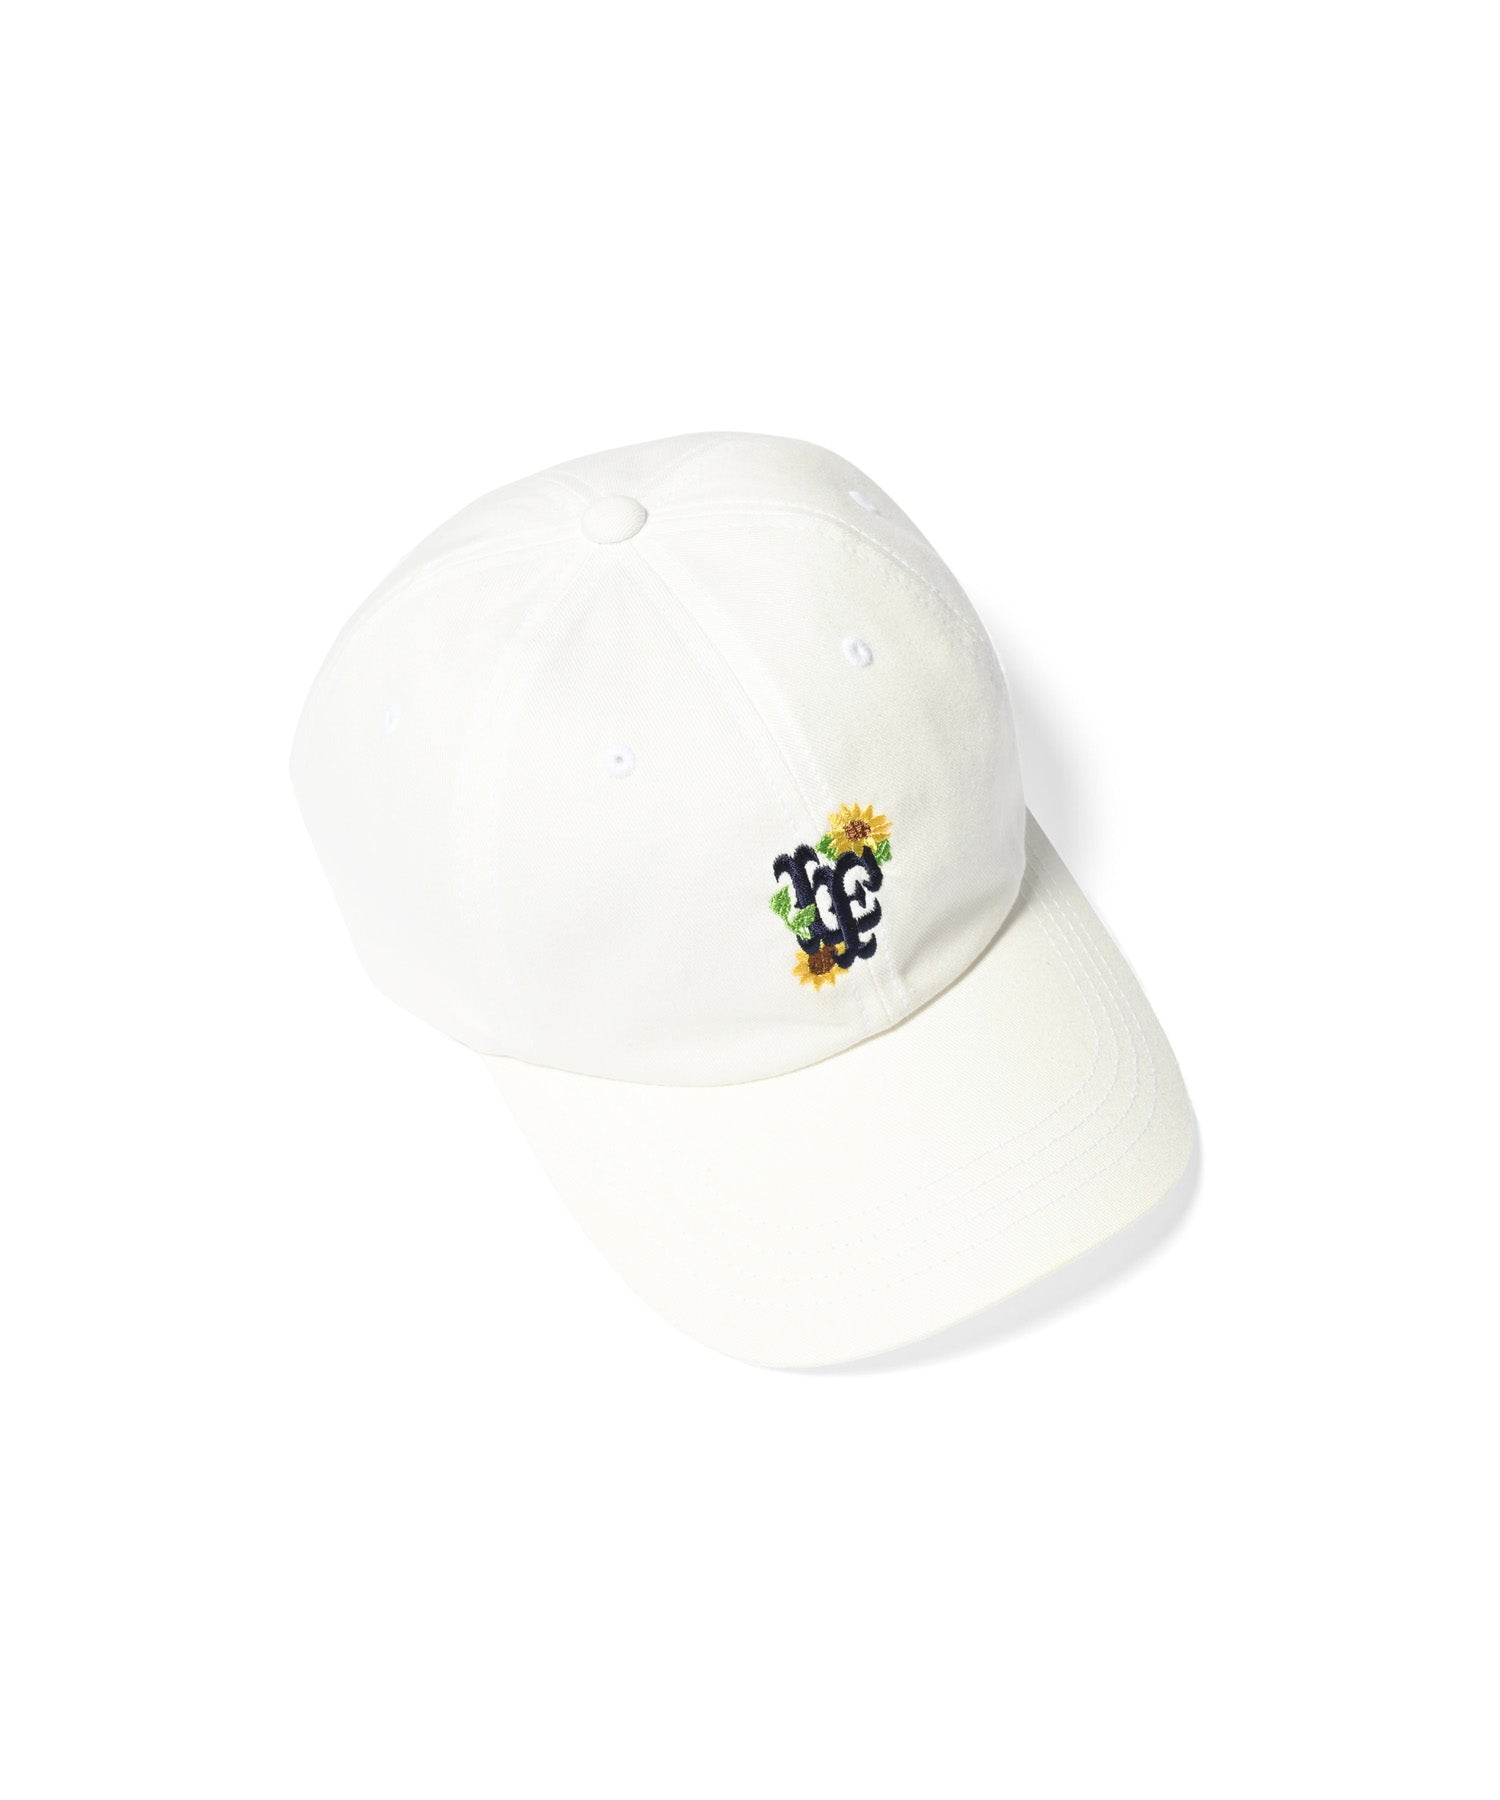 LFYT SUNFLOWER LF LOGO DAD HAT "directed by YUUMI" LE231403